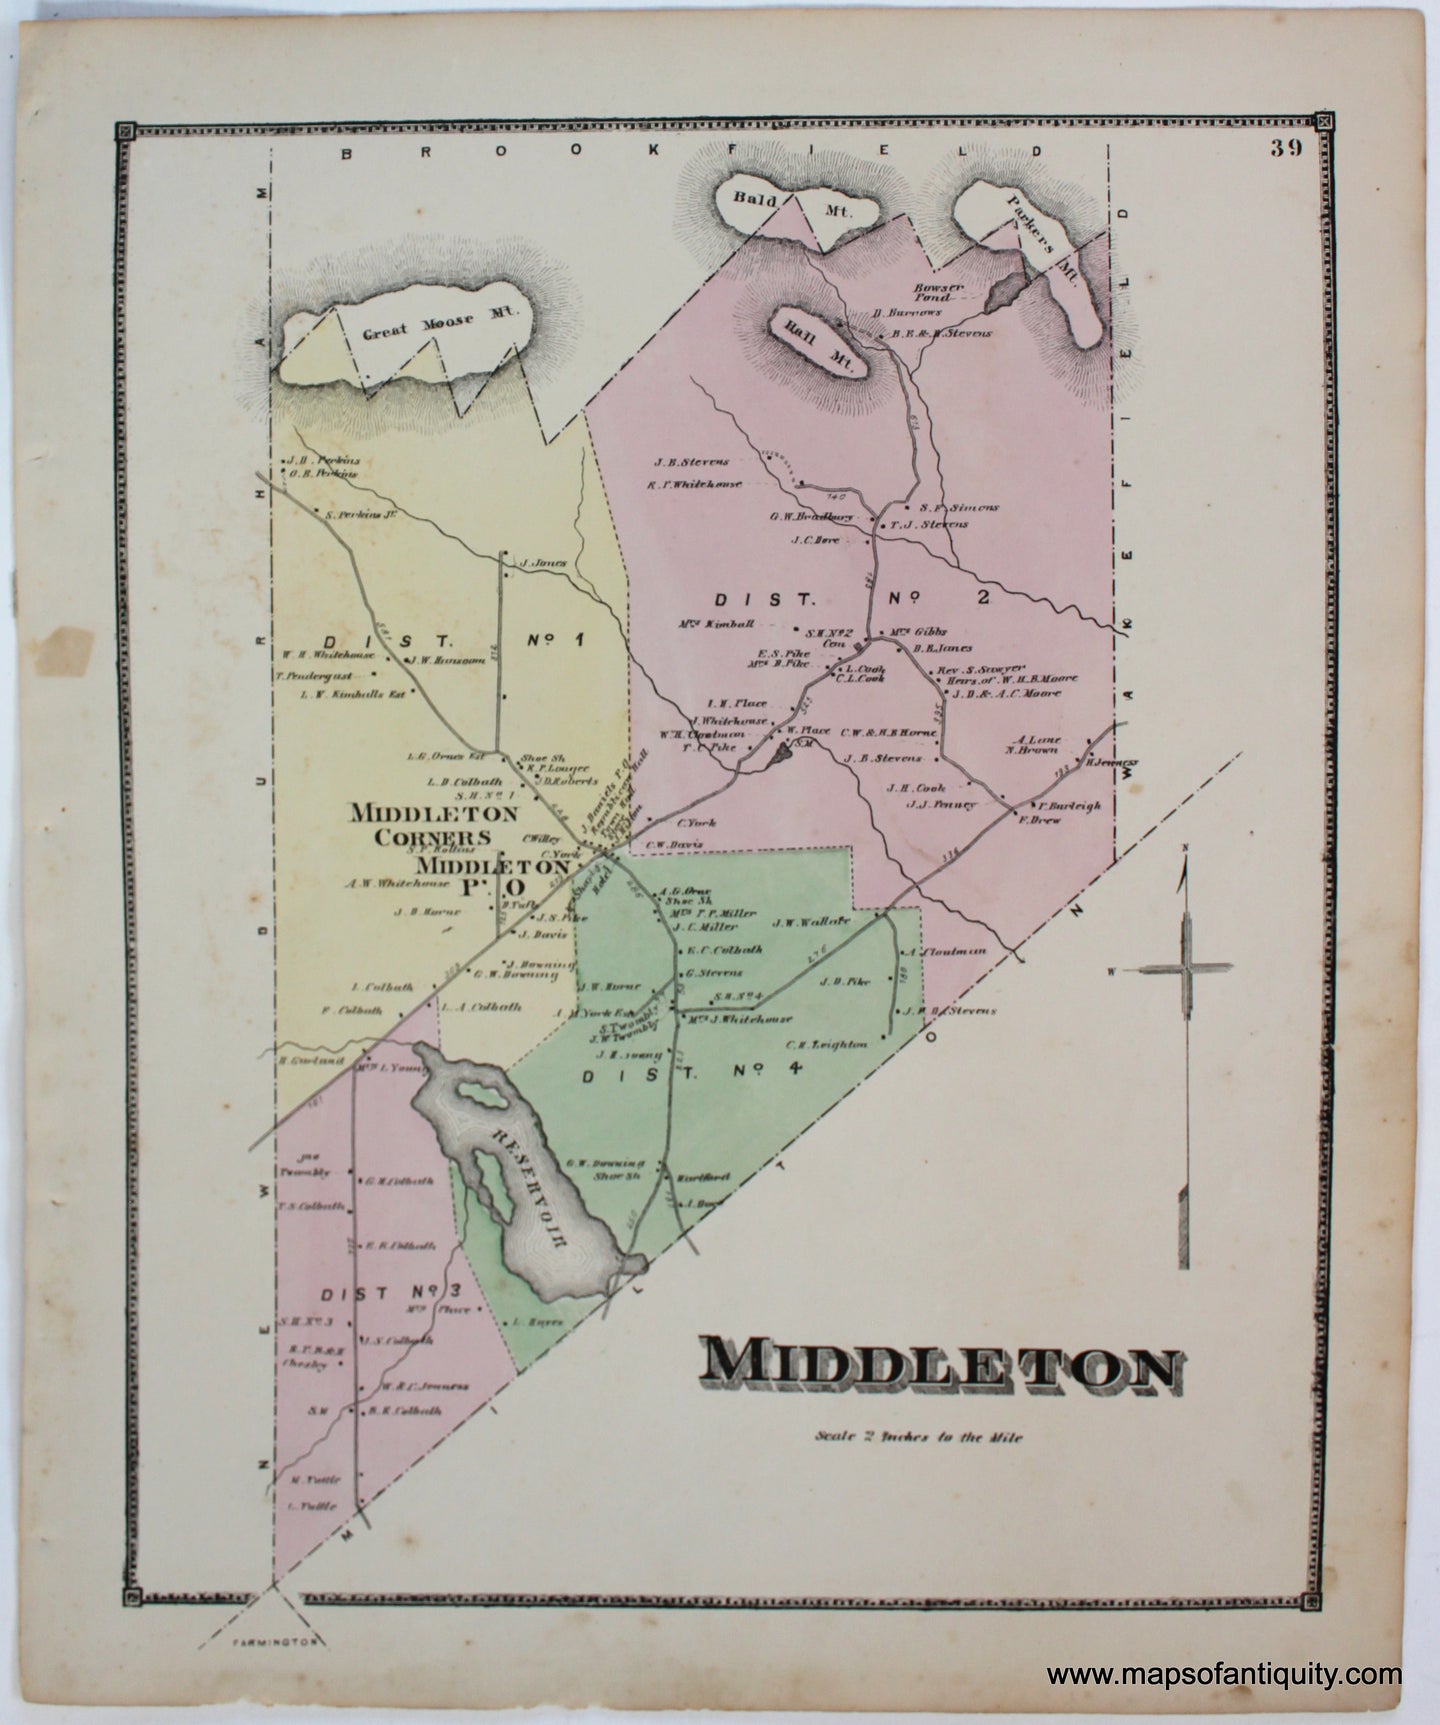 Antique-Map-Middleton-Strafford-County-Town-Towns-New-Hampshire-NH-Sanford-Everts-1871-1870s-1800s-Mid-Late-19th-Century-Maps-of-Antiquity